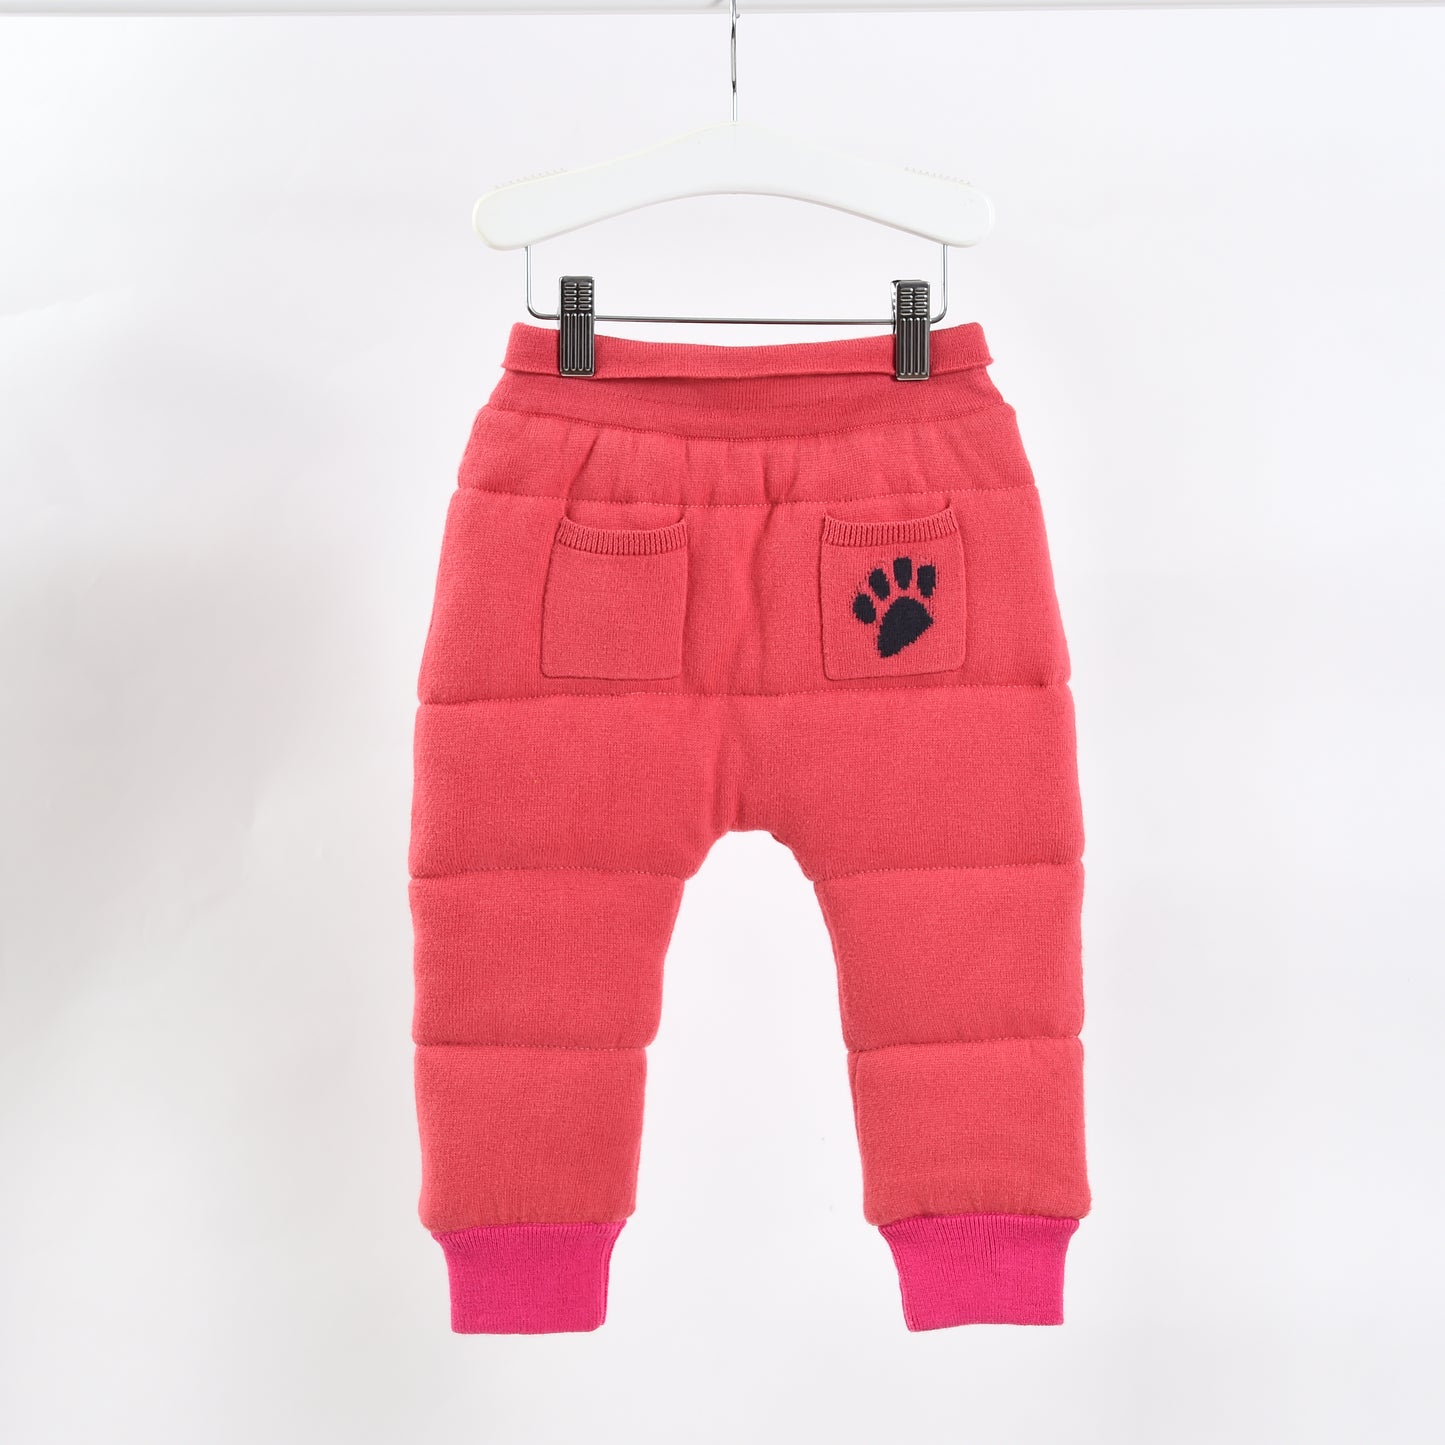 PANTS - BABY - 3 COLOR (MUSTARD/PINK/TEAL) - BBA15 052